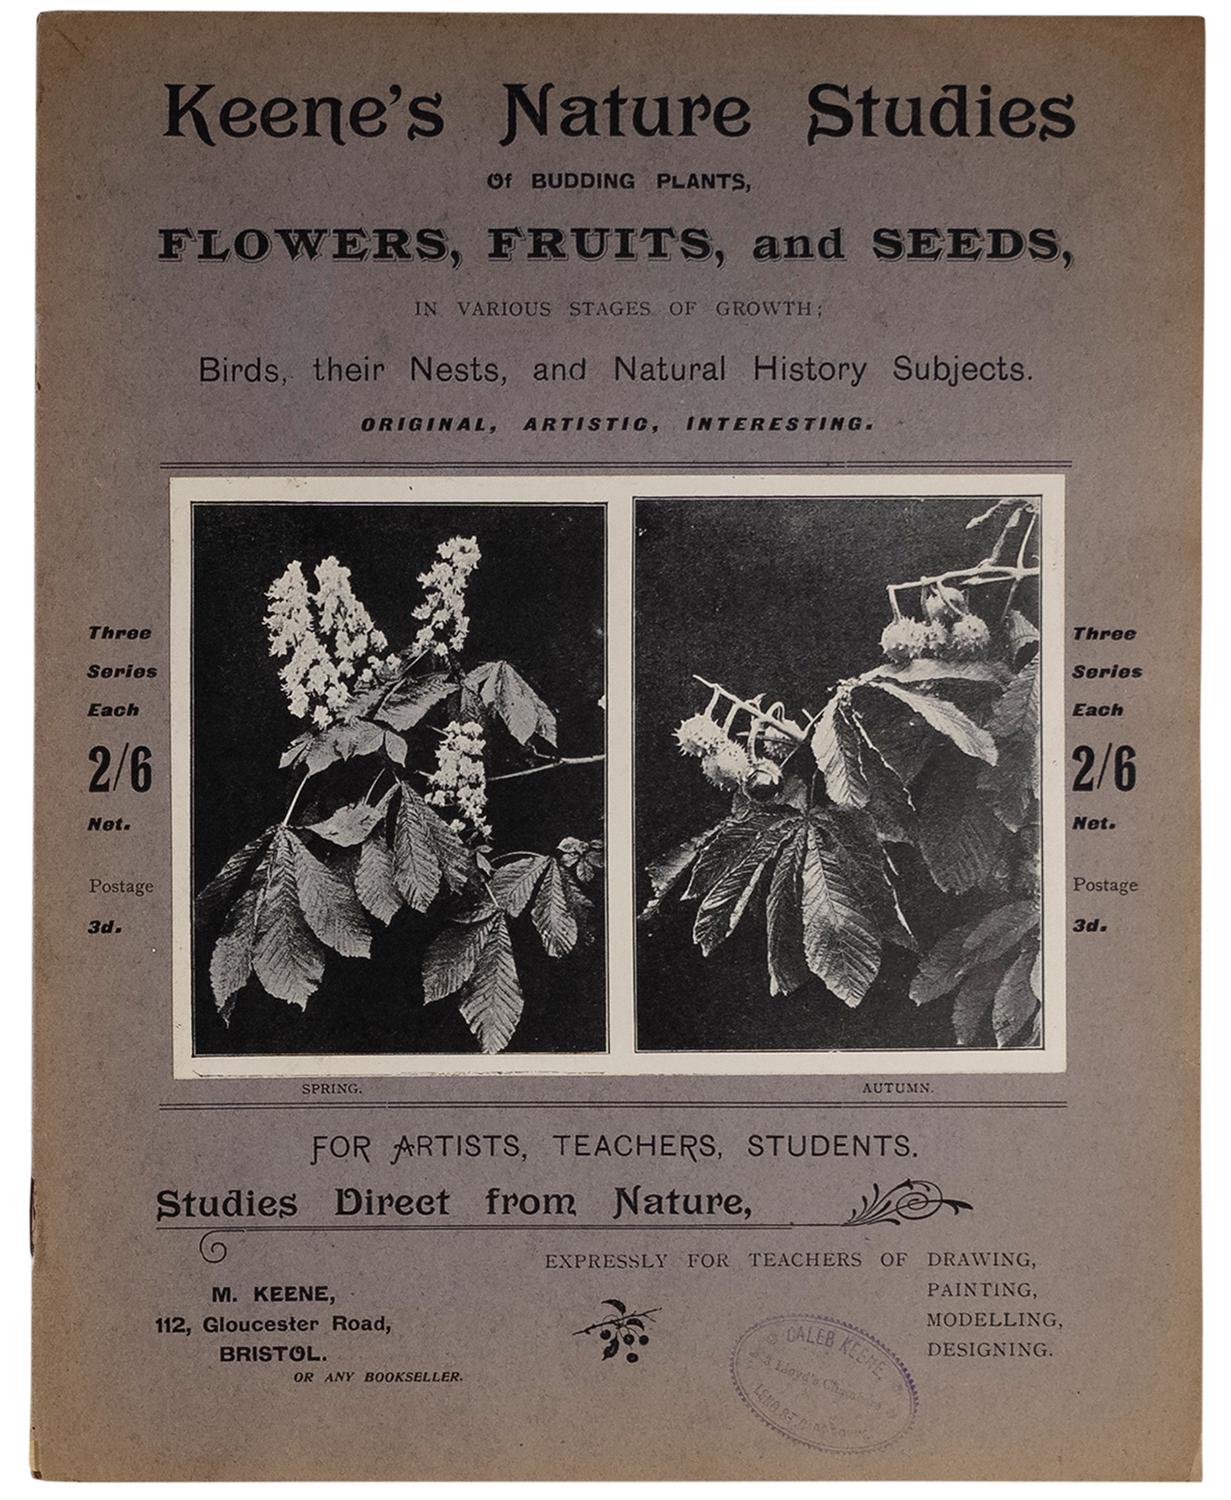 A poster with the title “Keenes Nature Studies,” advertising classes to learn about budding plants such as flowers, fruits and seeds. Two photographs of leafy flower plants in the middle. Halftone print by Minna Keene.